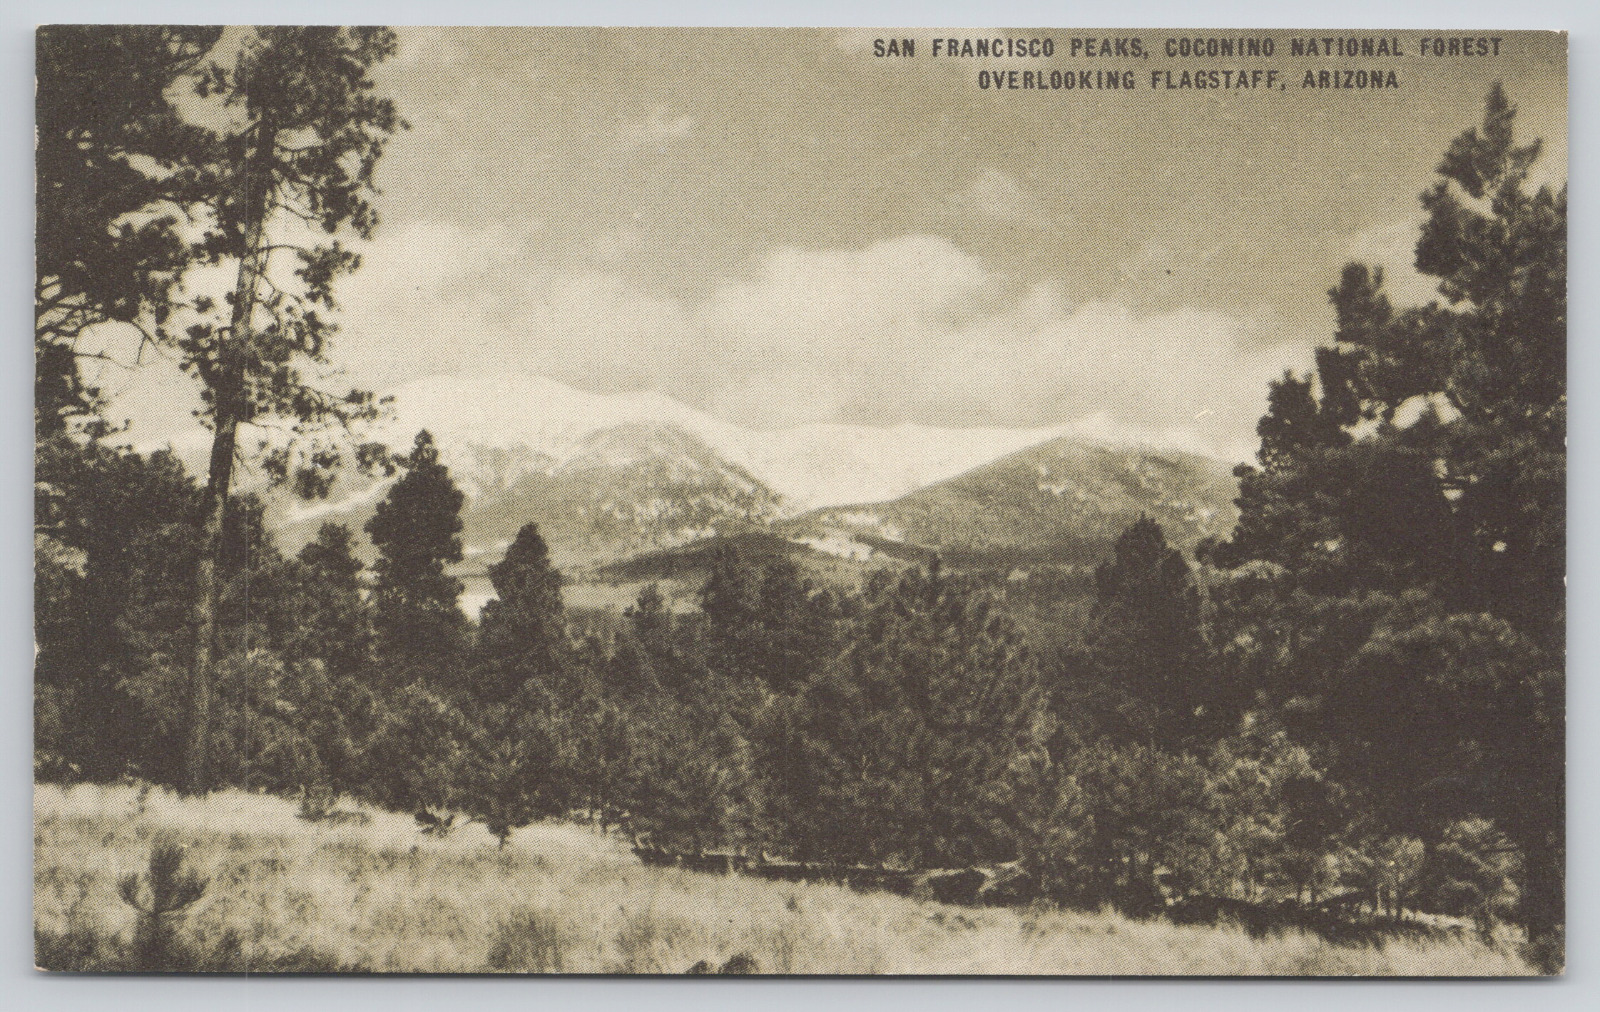 Postcard San Francisco Peaks, Coconino National Forest, Over Flagstaff A499